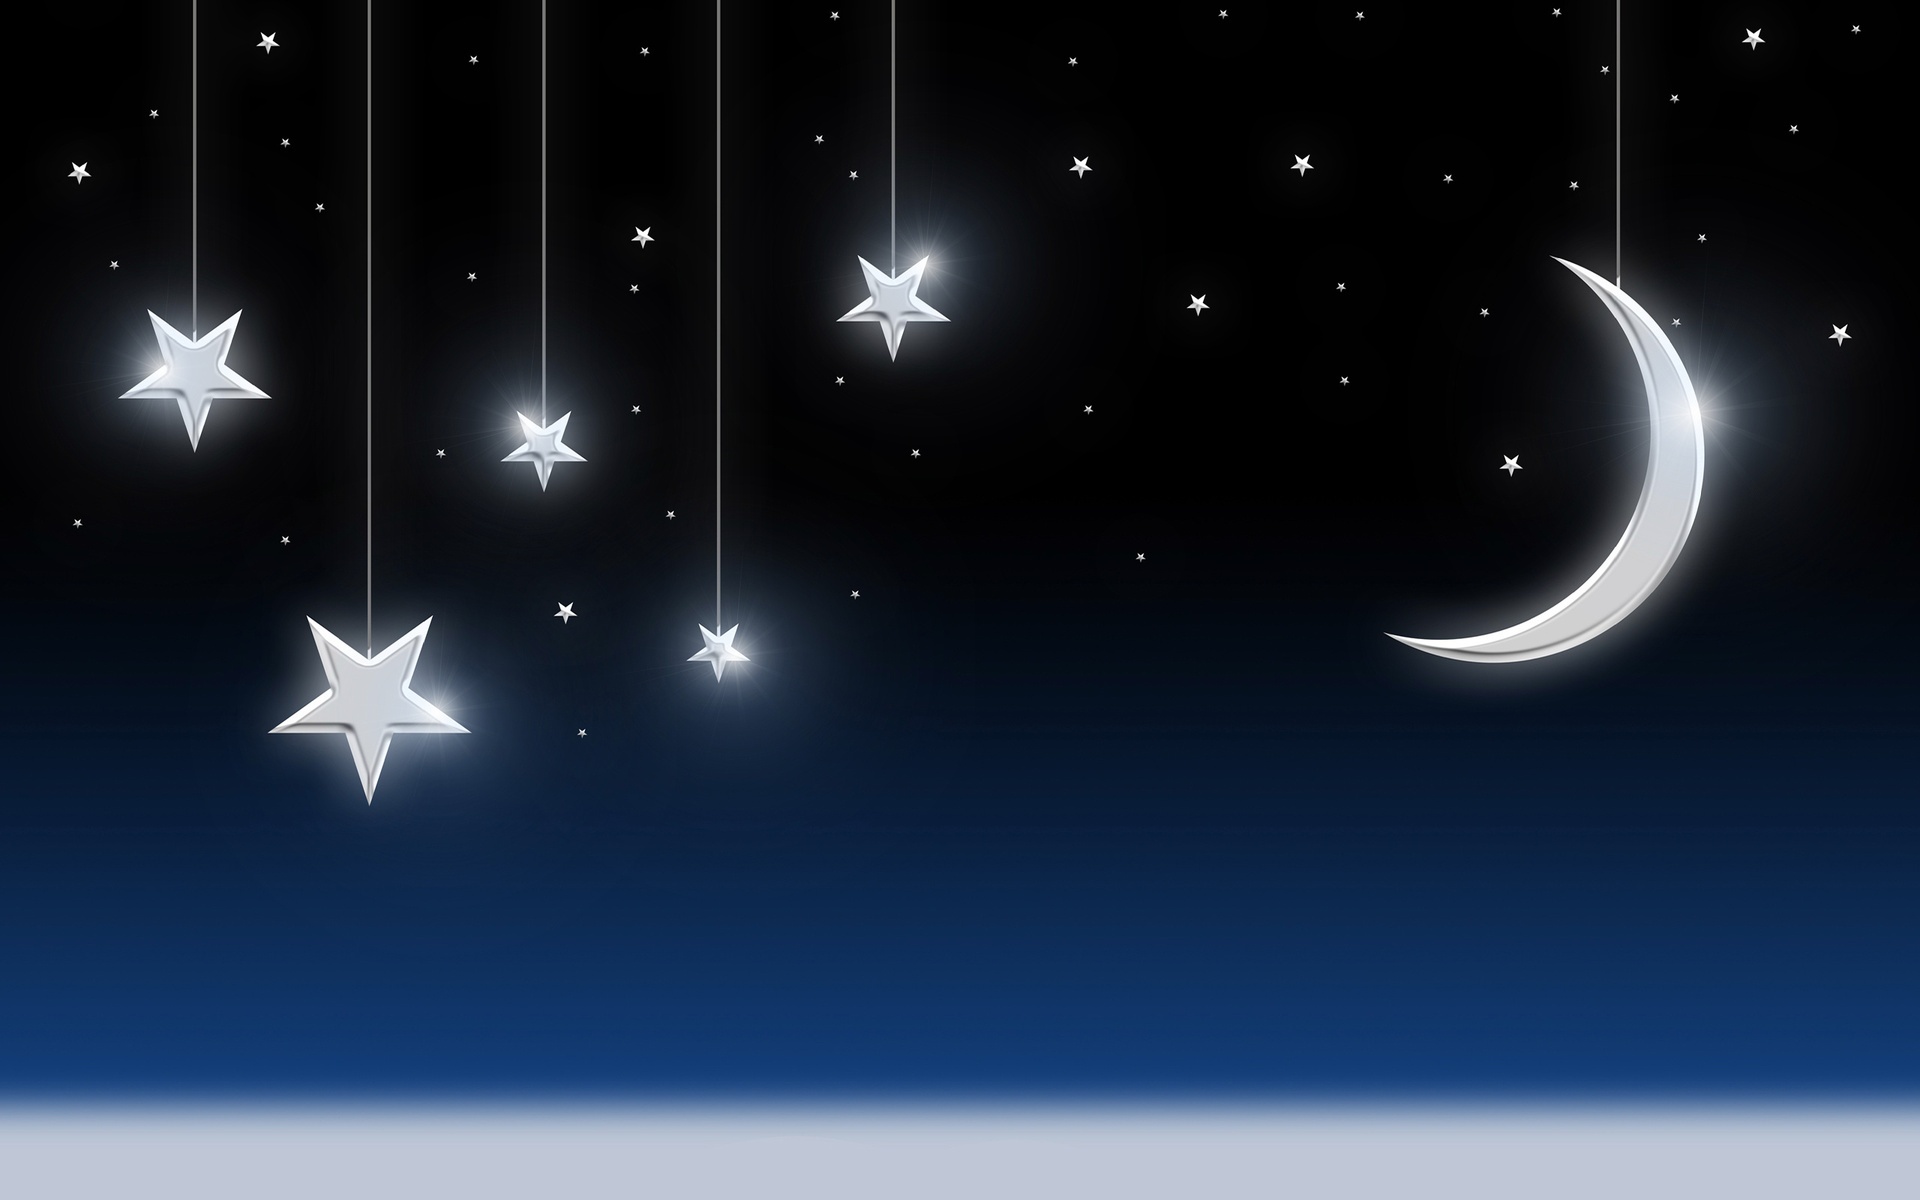 Sky With Moon And Stars   1920 X 1200   Download   Close